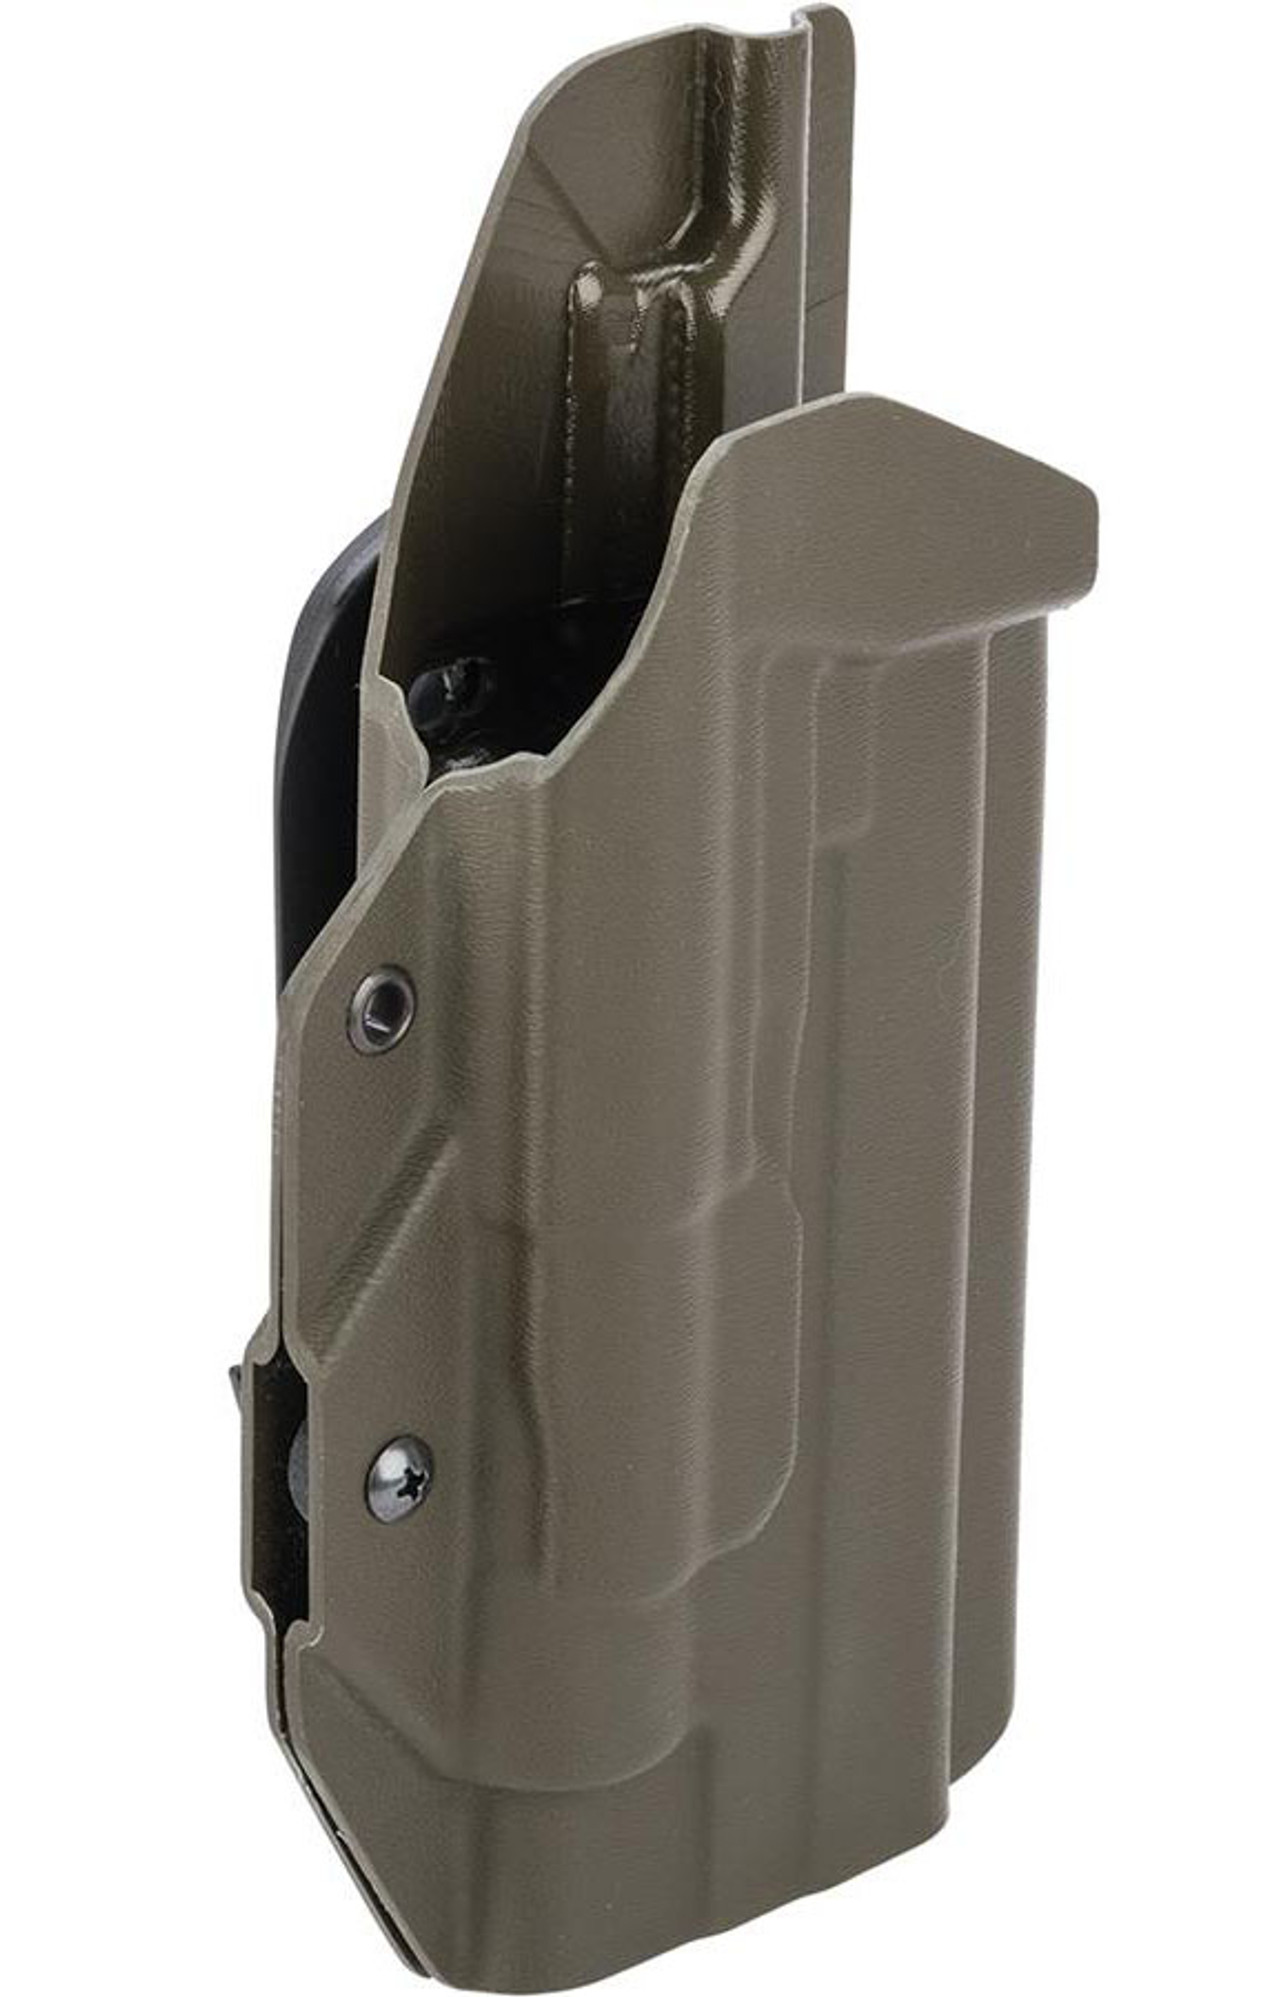 MC Kydex Airsoft Elite Series Pistol Holster for 1911 w/ TLR-1 Flashlight (Model: OD Green / Safariland 6004-16 MOLLE Mount / Right Hand)